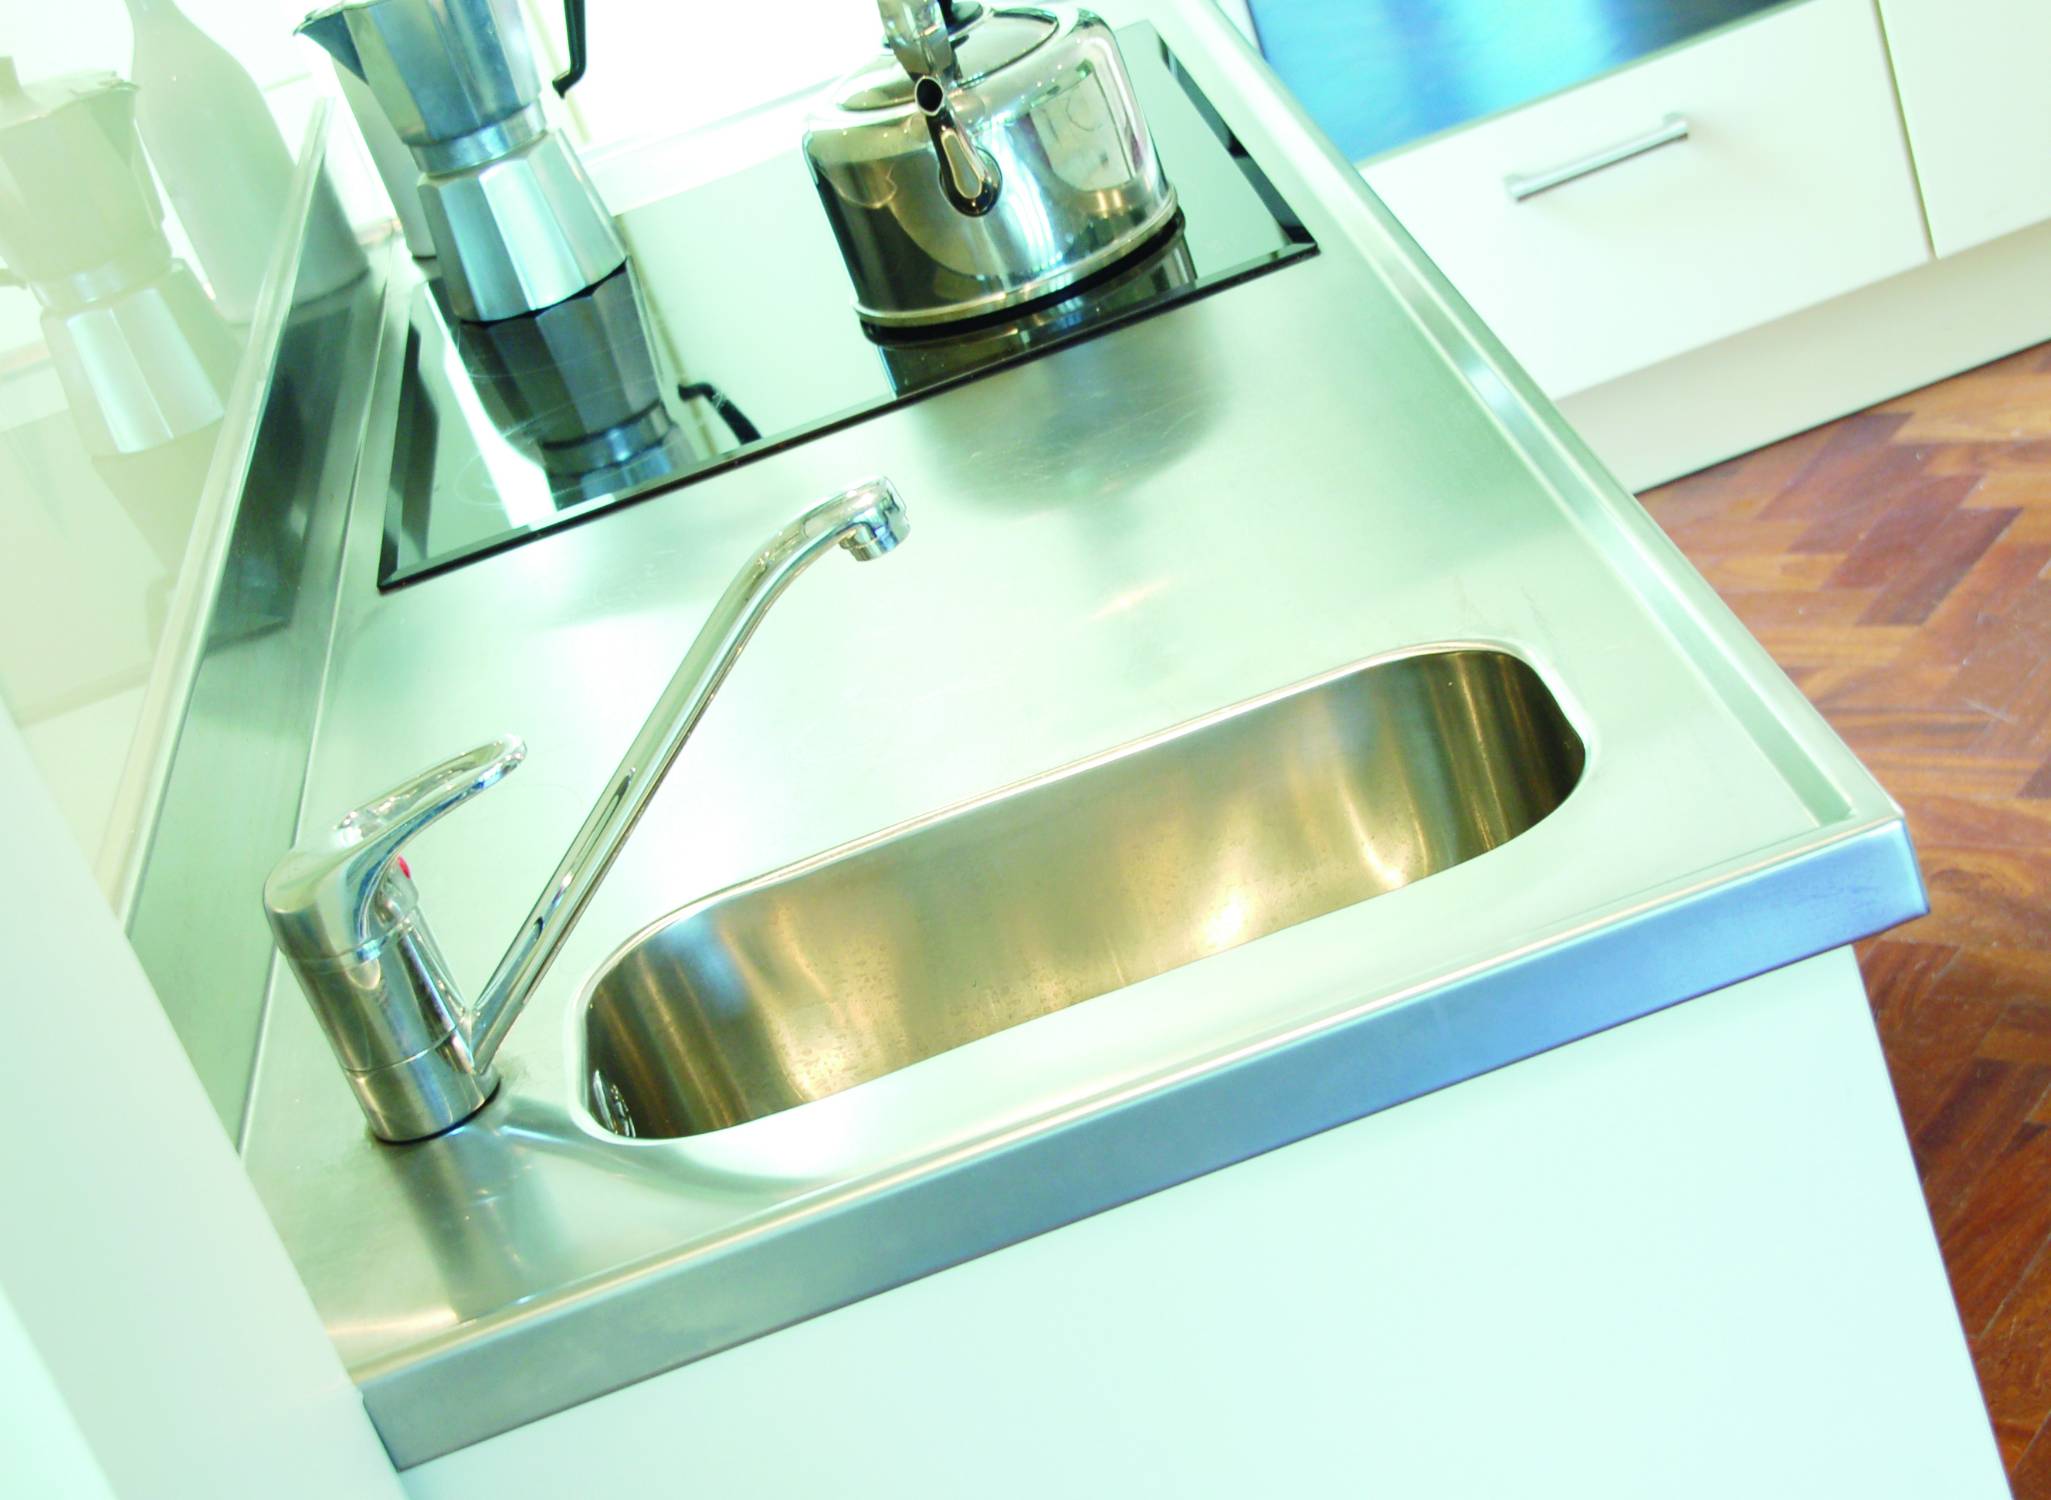 Sink Bowl LE18 - Single Stainless Steel Kitchen Sink